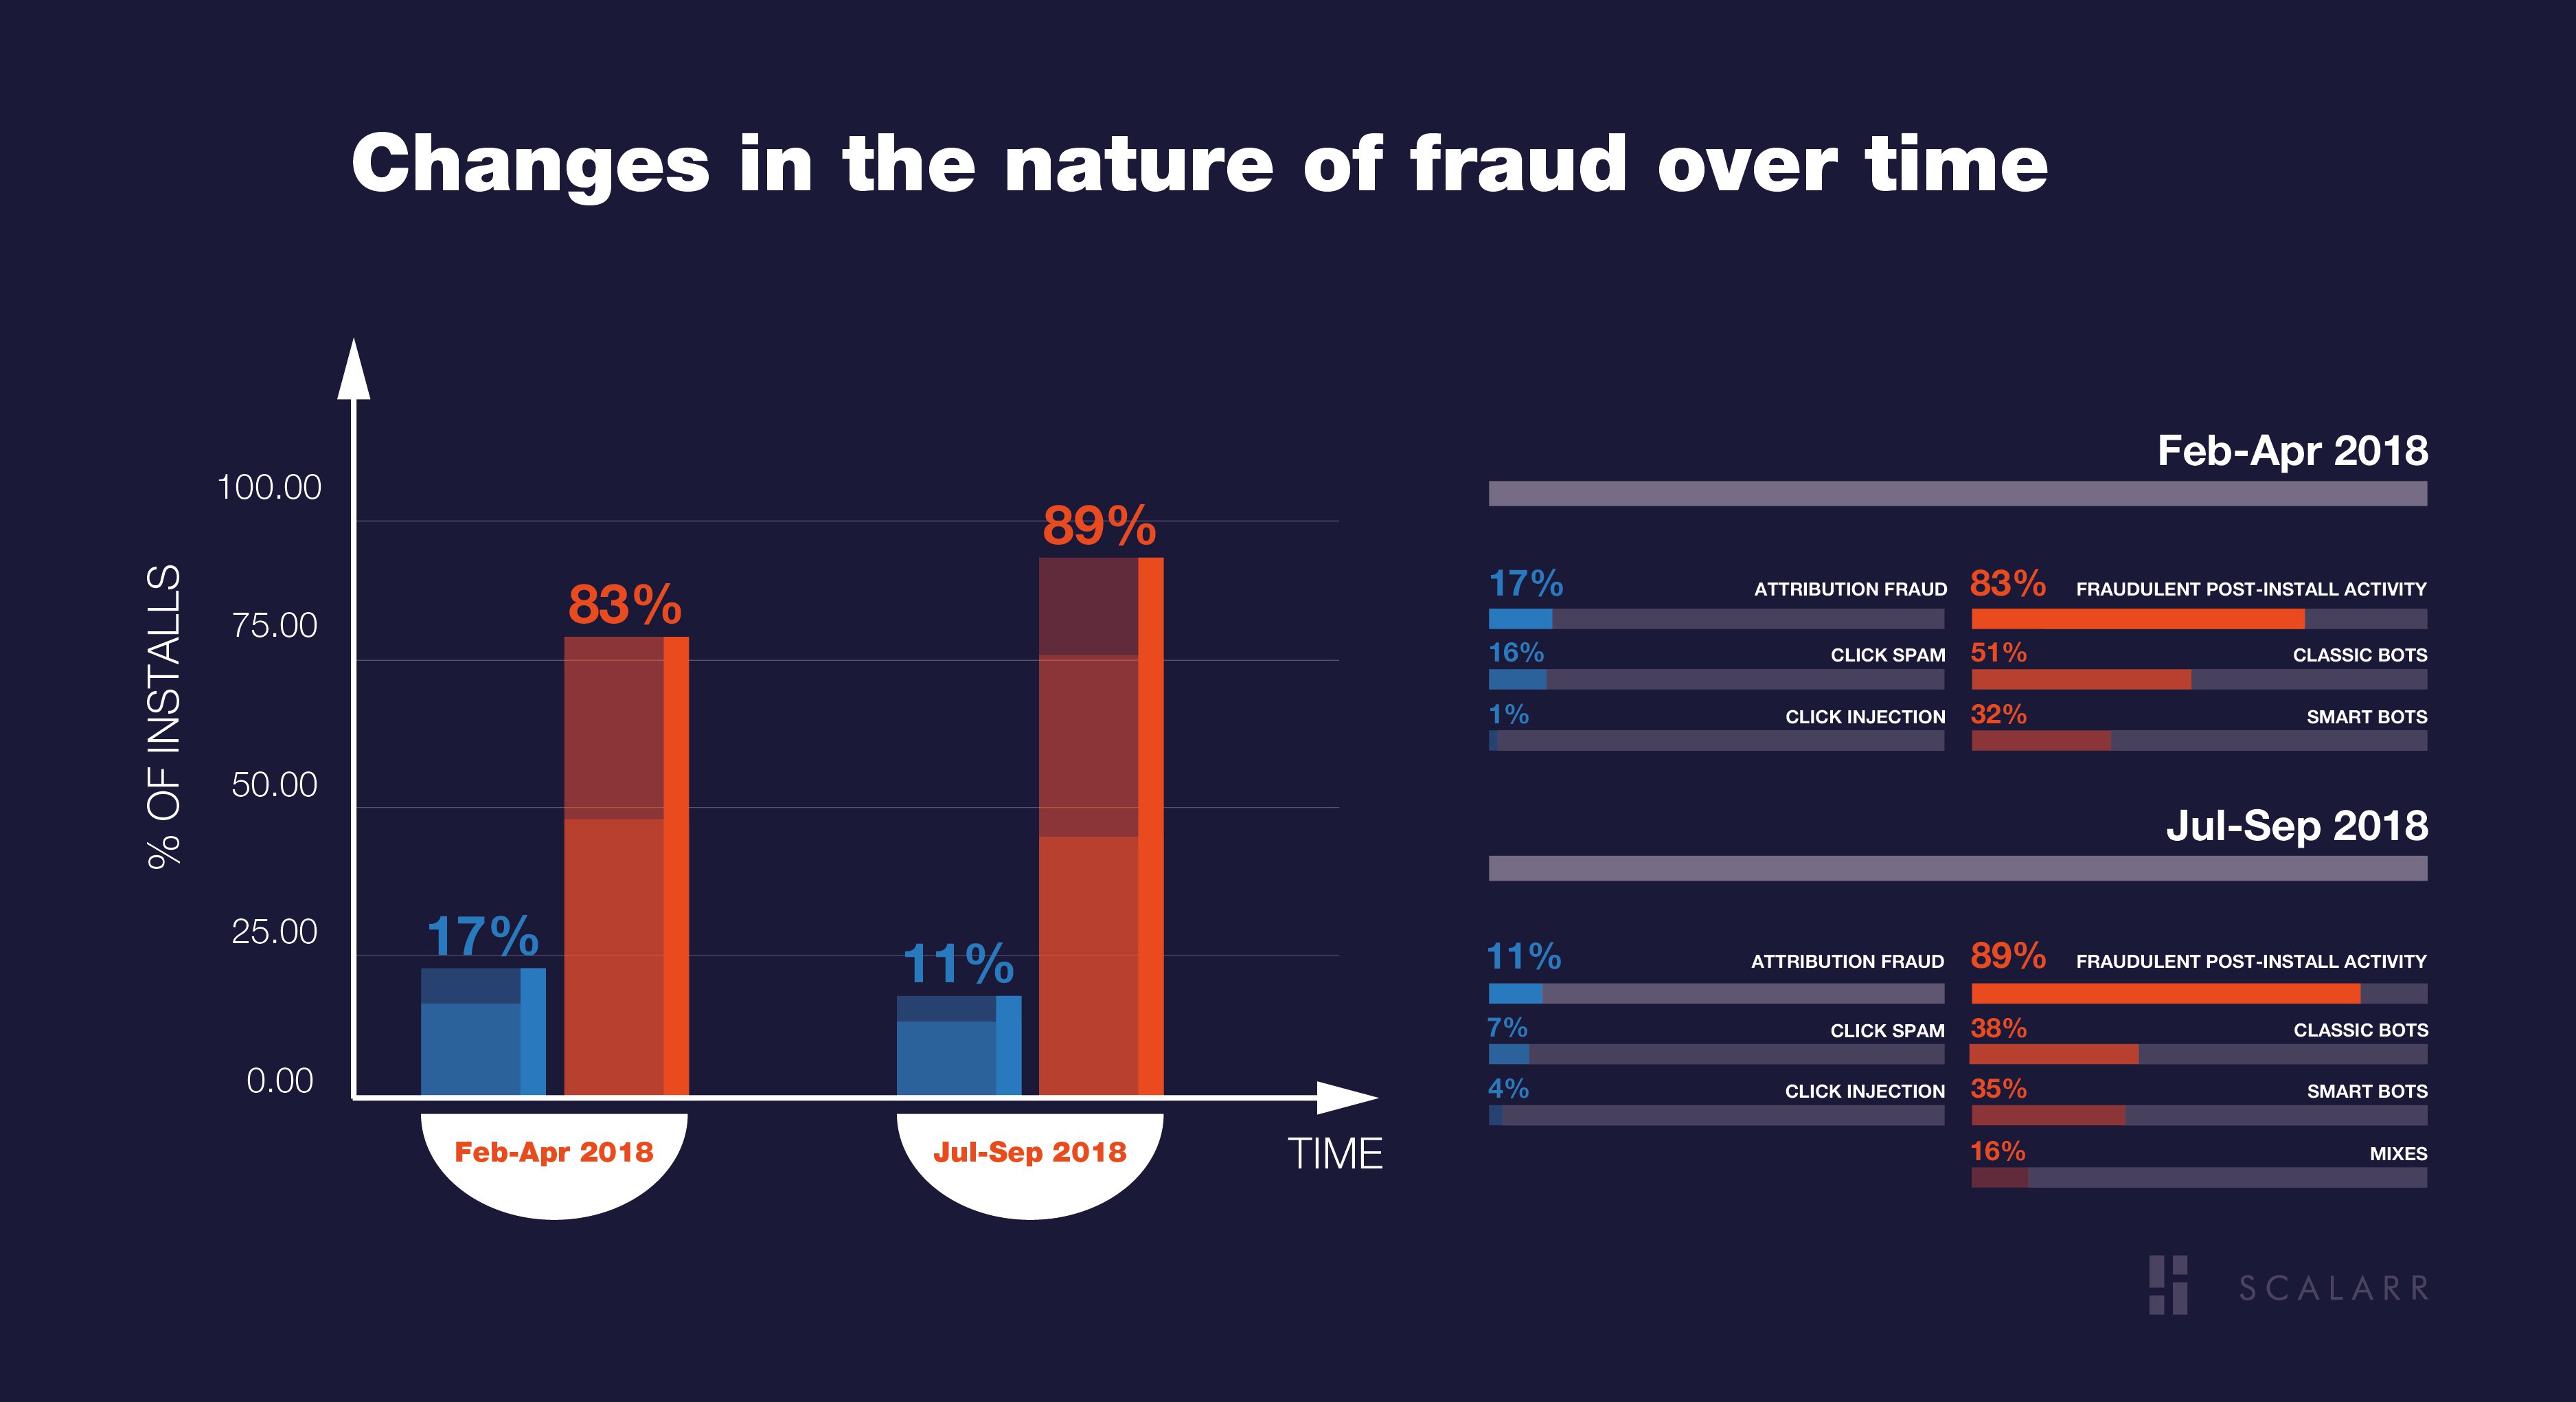 Changes in the nature of fraud over time